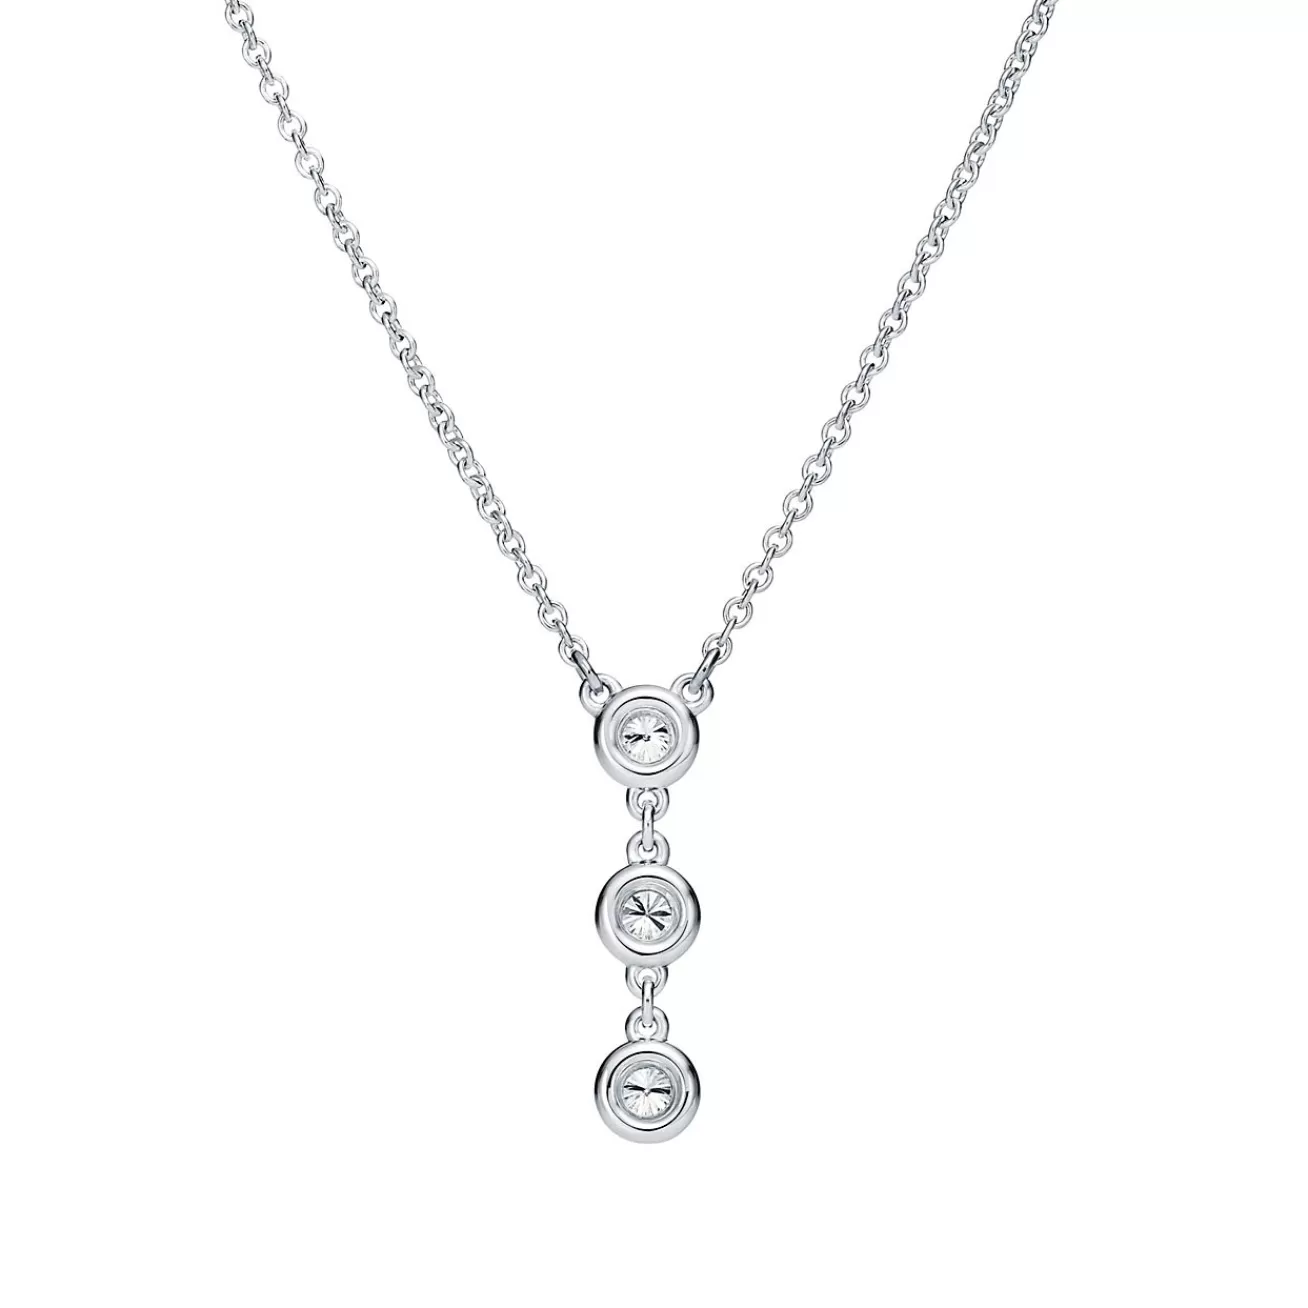 Tiffany & Co. Elsa Peretti® Diamonds by the Yard® drop pendant in sterling silver. | ^ Necklaces & Pendants | Sterling Silver Jewelry